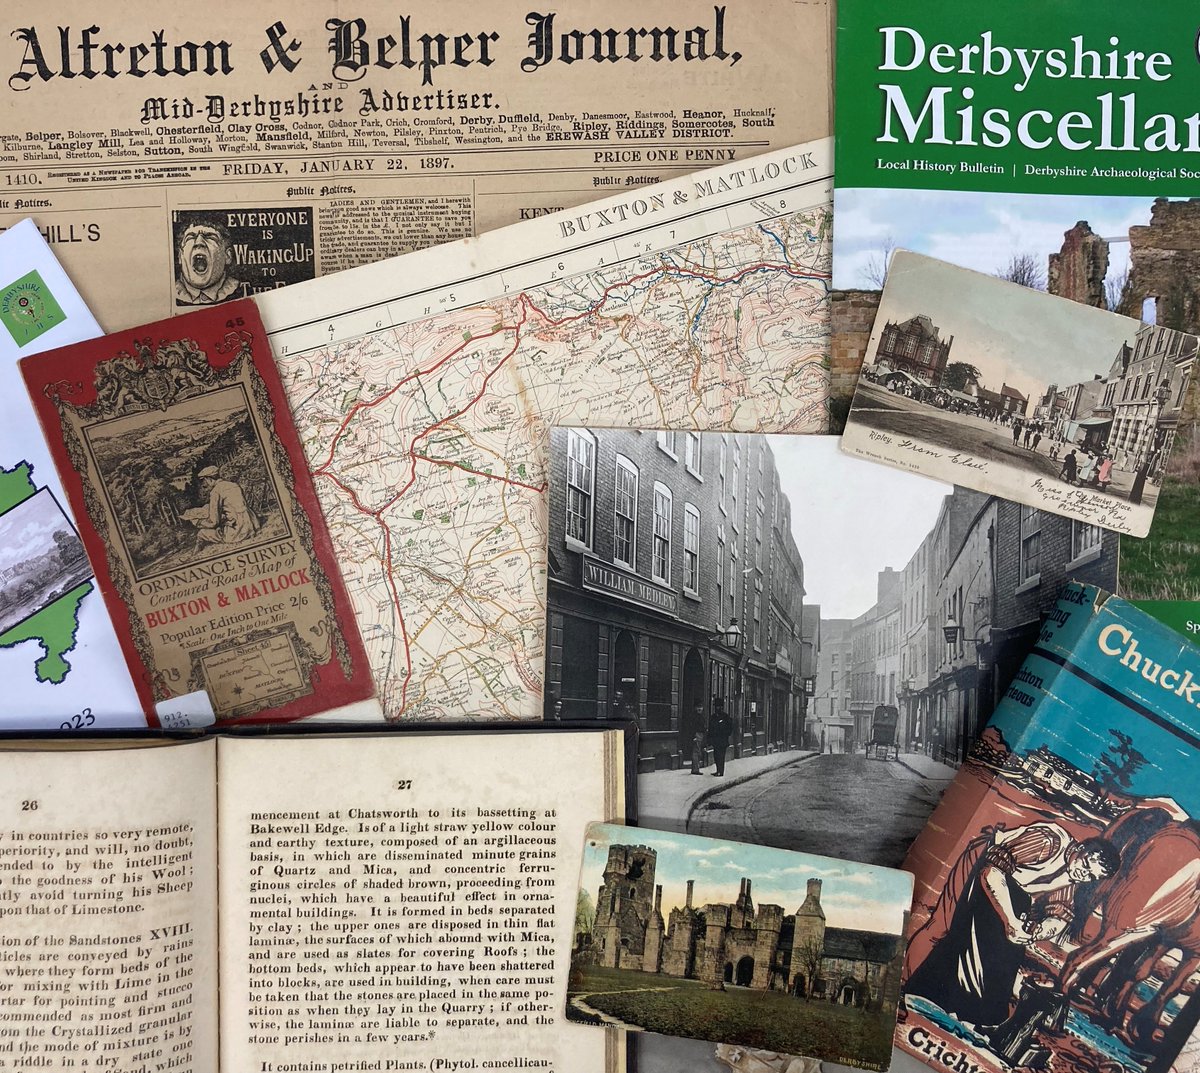 Today marks the start of #LocalAndCommunityHistoryMonth, when every year people are encouraged to find out about the history around them. Our #LocalStudies collection is a good place to begin with books, newspapers, photographs and more.